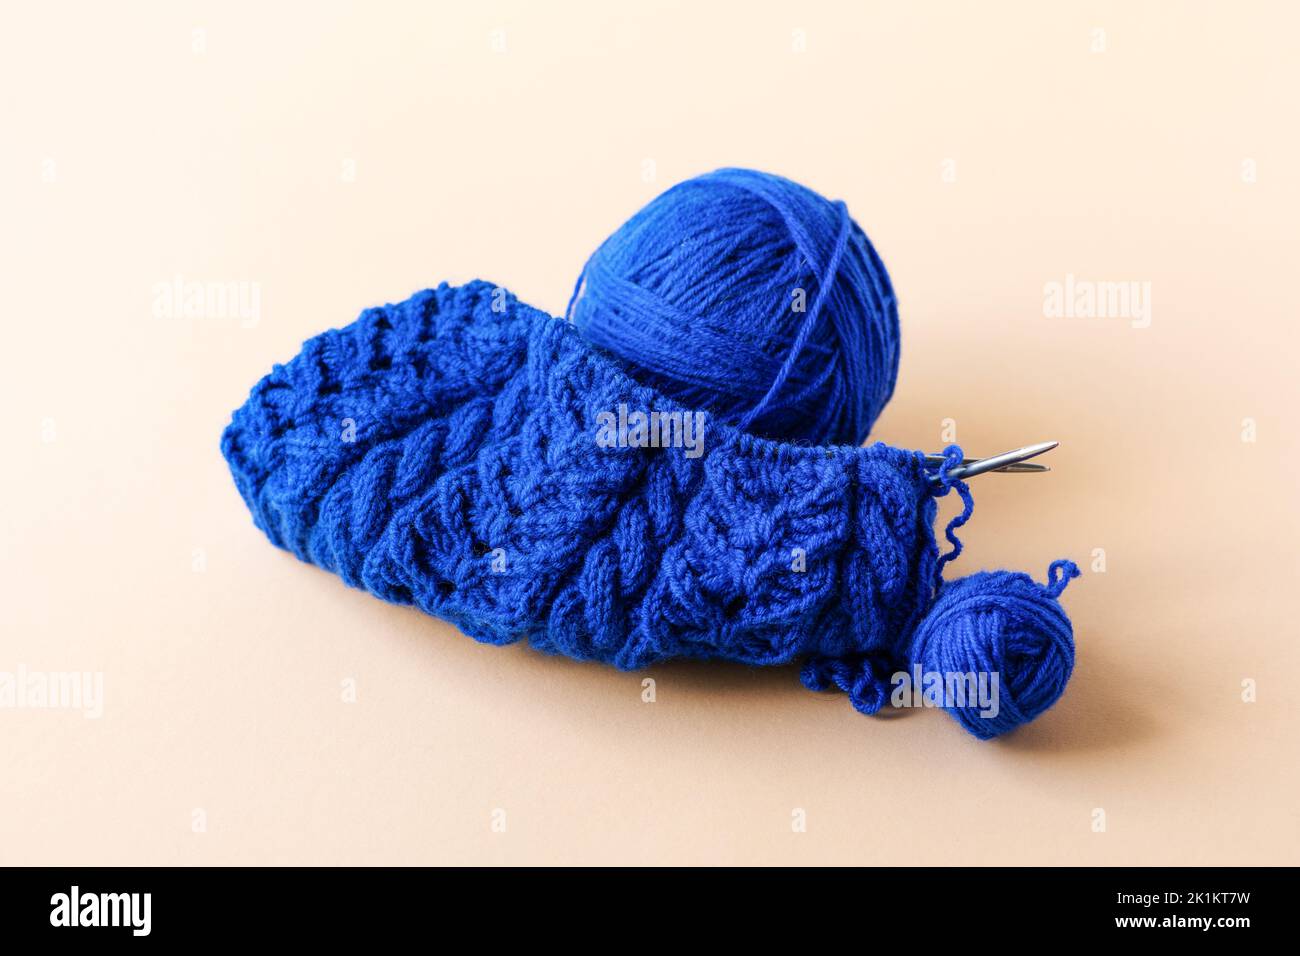 Knitting blue warm clothes with knitting needles and blue balls of thread on an orange background Stock Photo